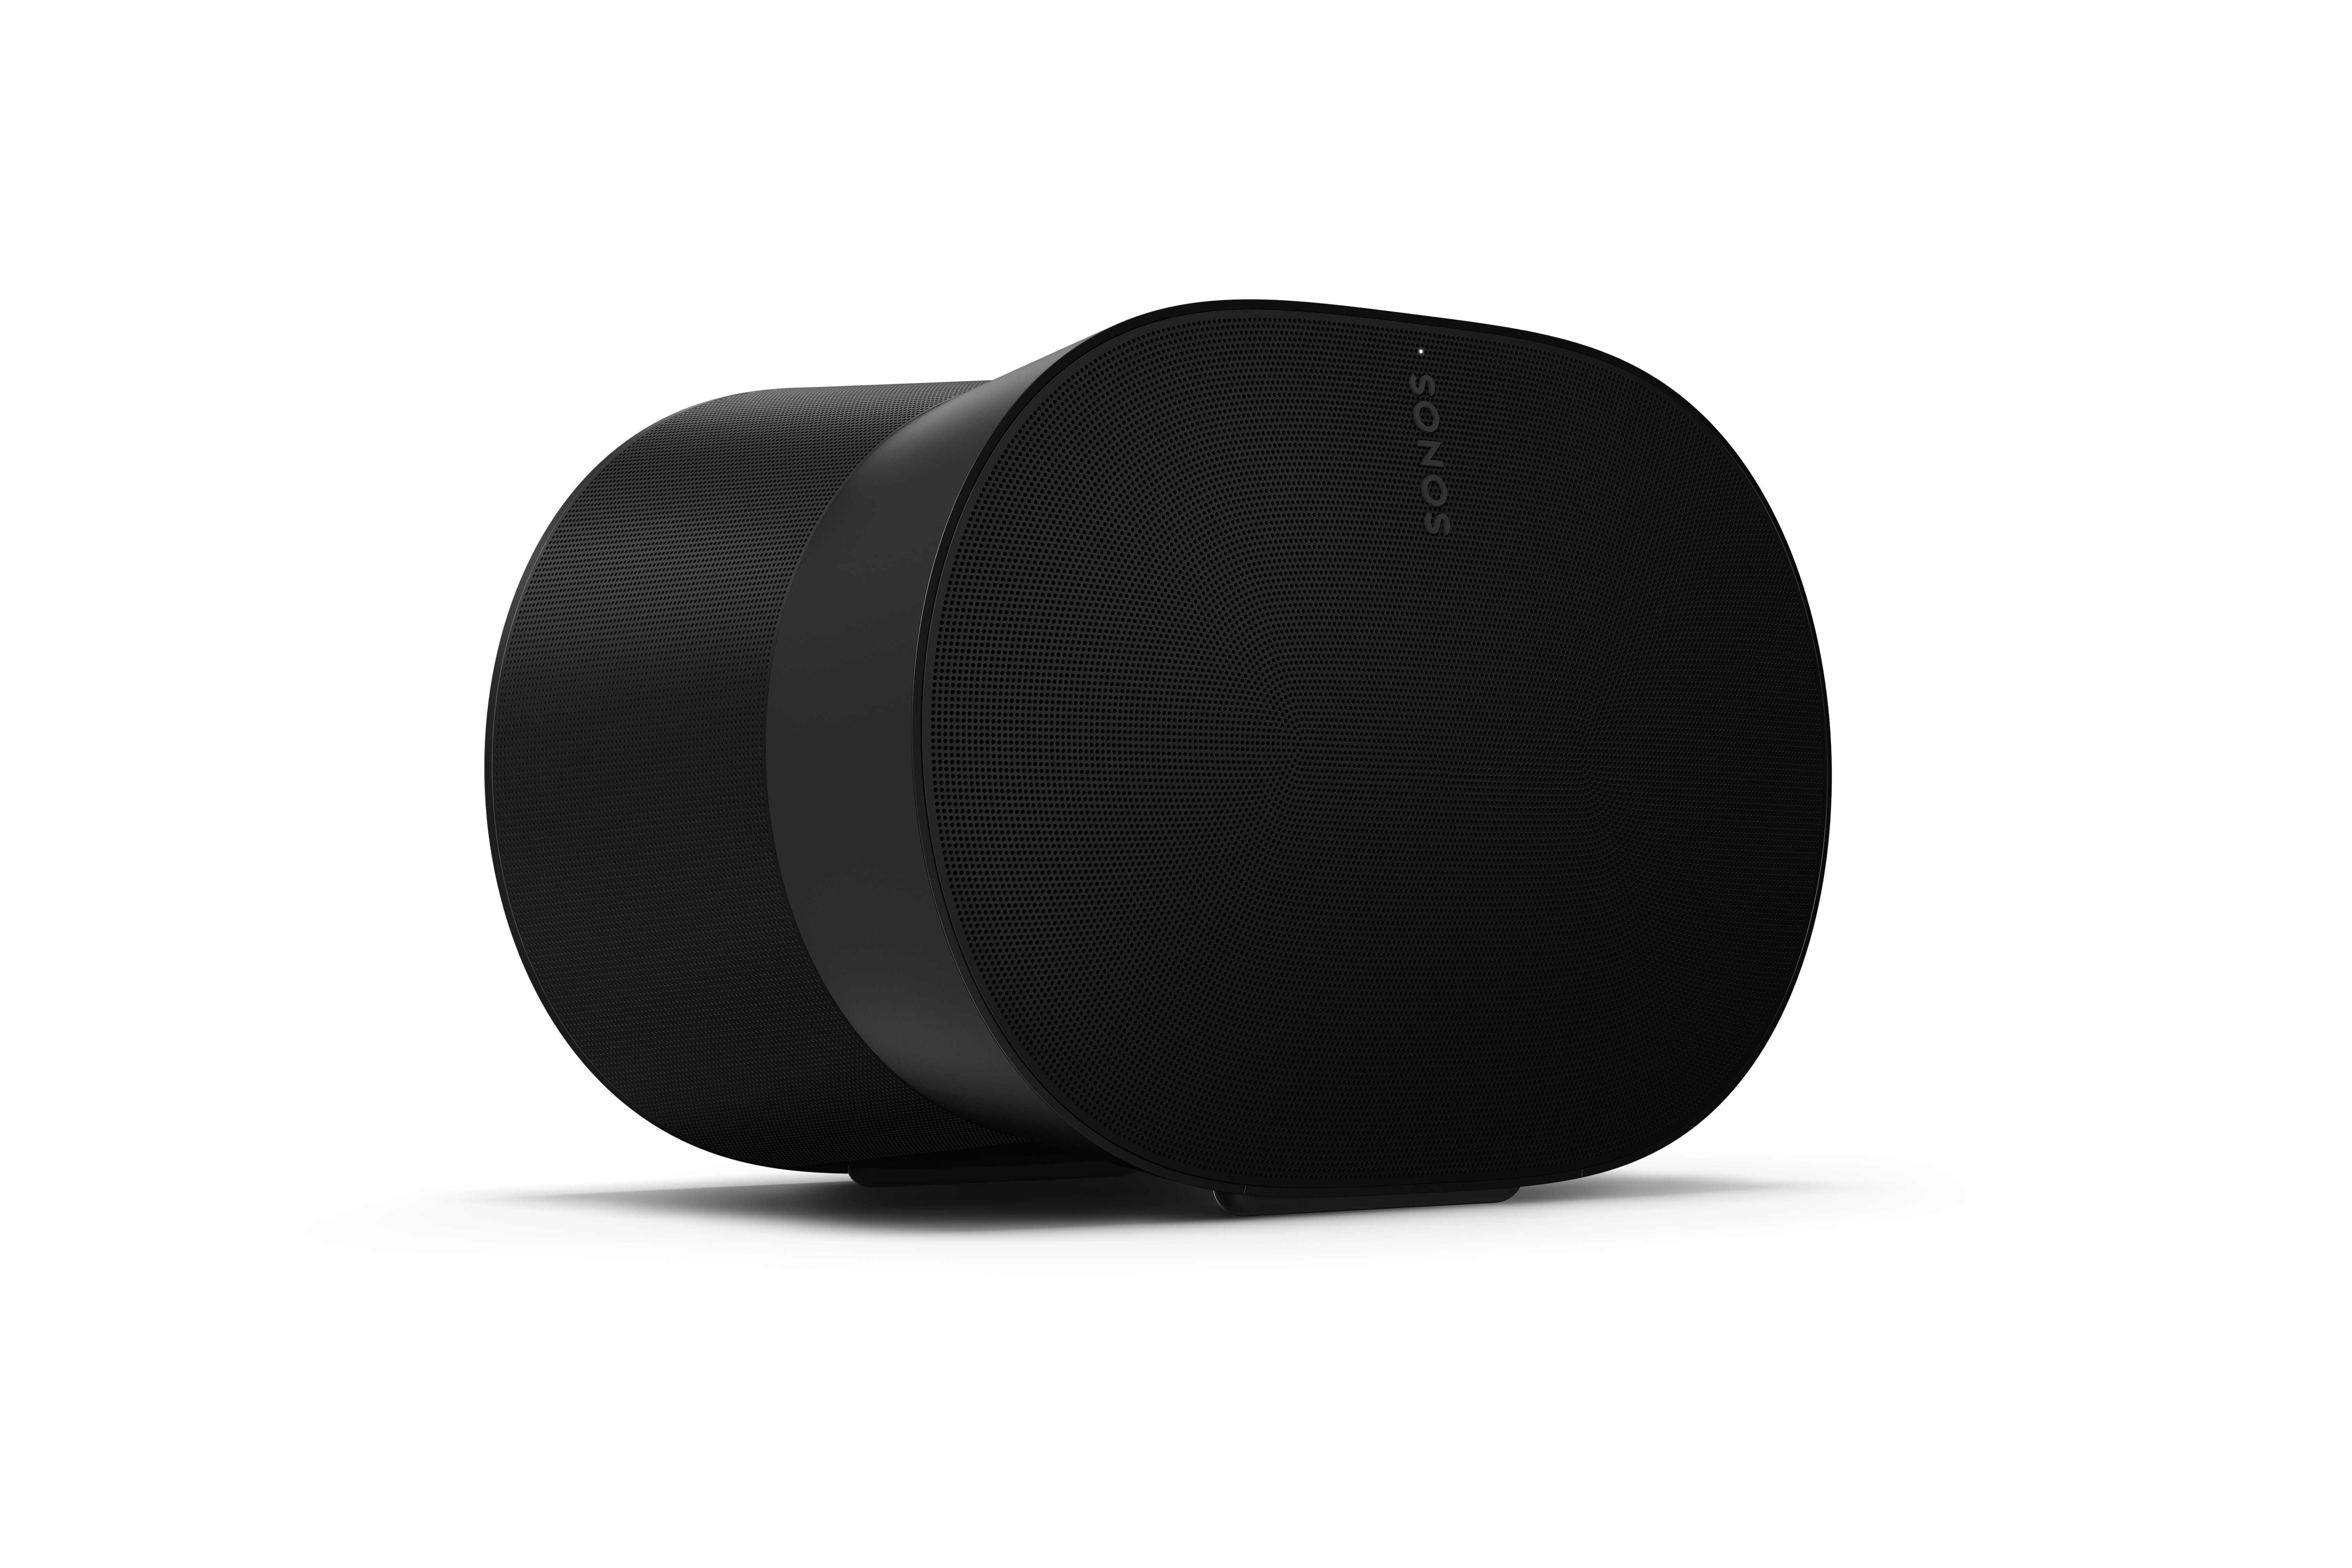 Era 100 from Sonos large dolby atmos capable wifi speaker